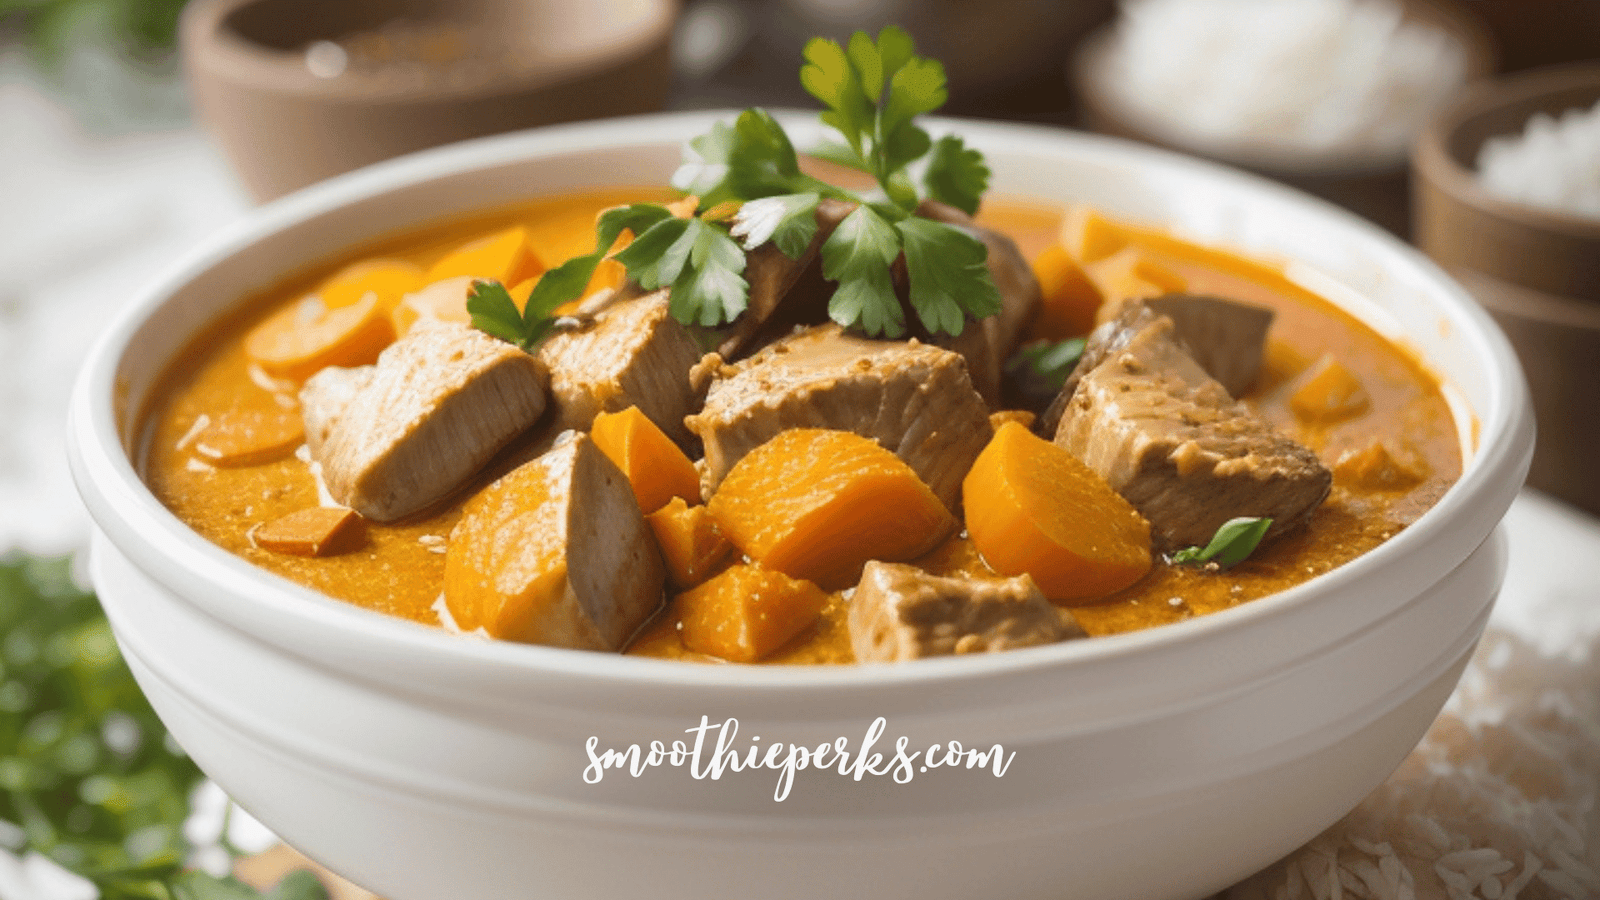 Pork and Apricot Curry